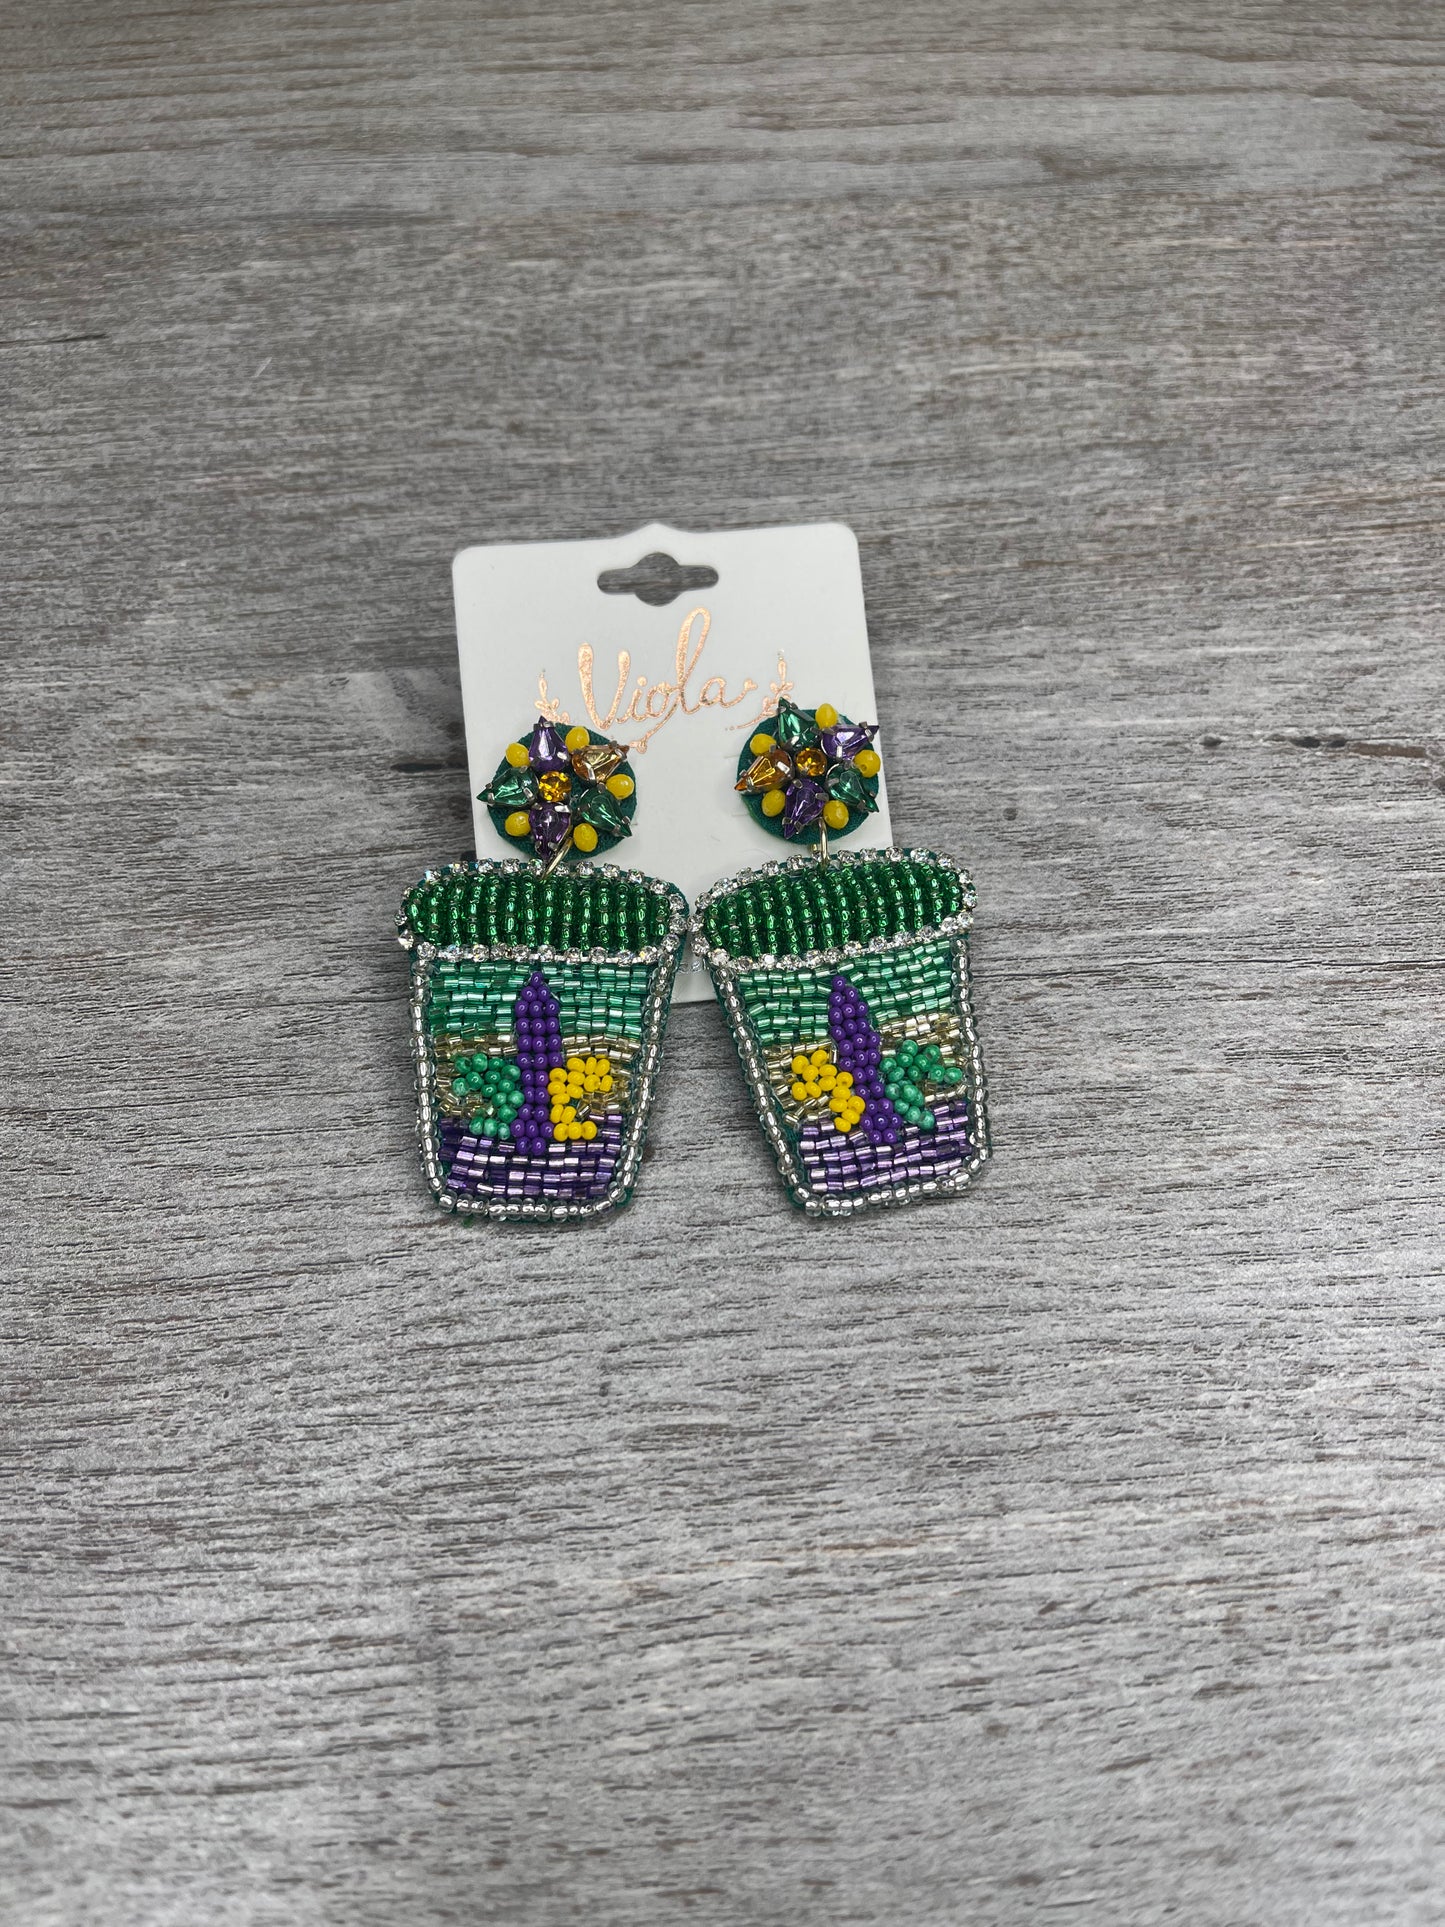 It's In Our Soul To Have Mardi Gras Earrings❤️